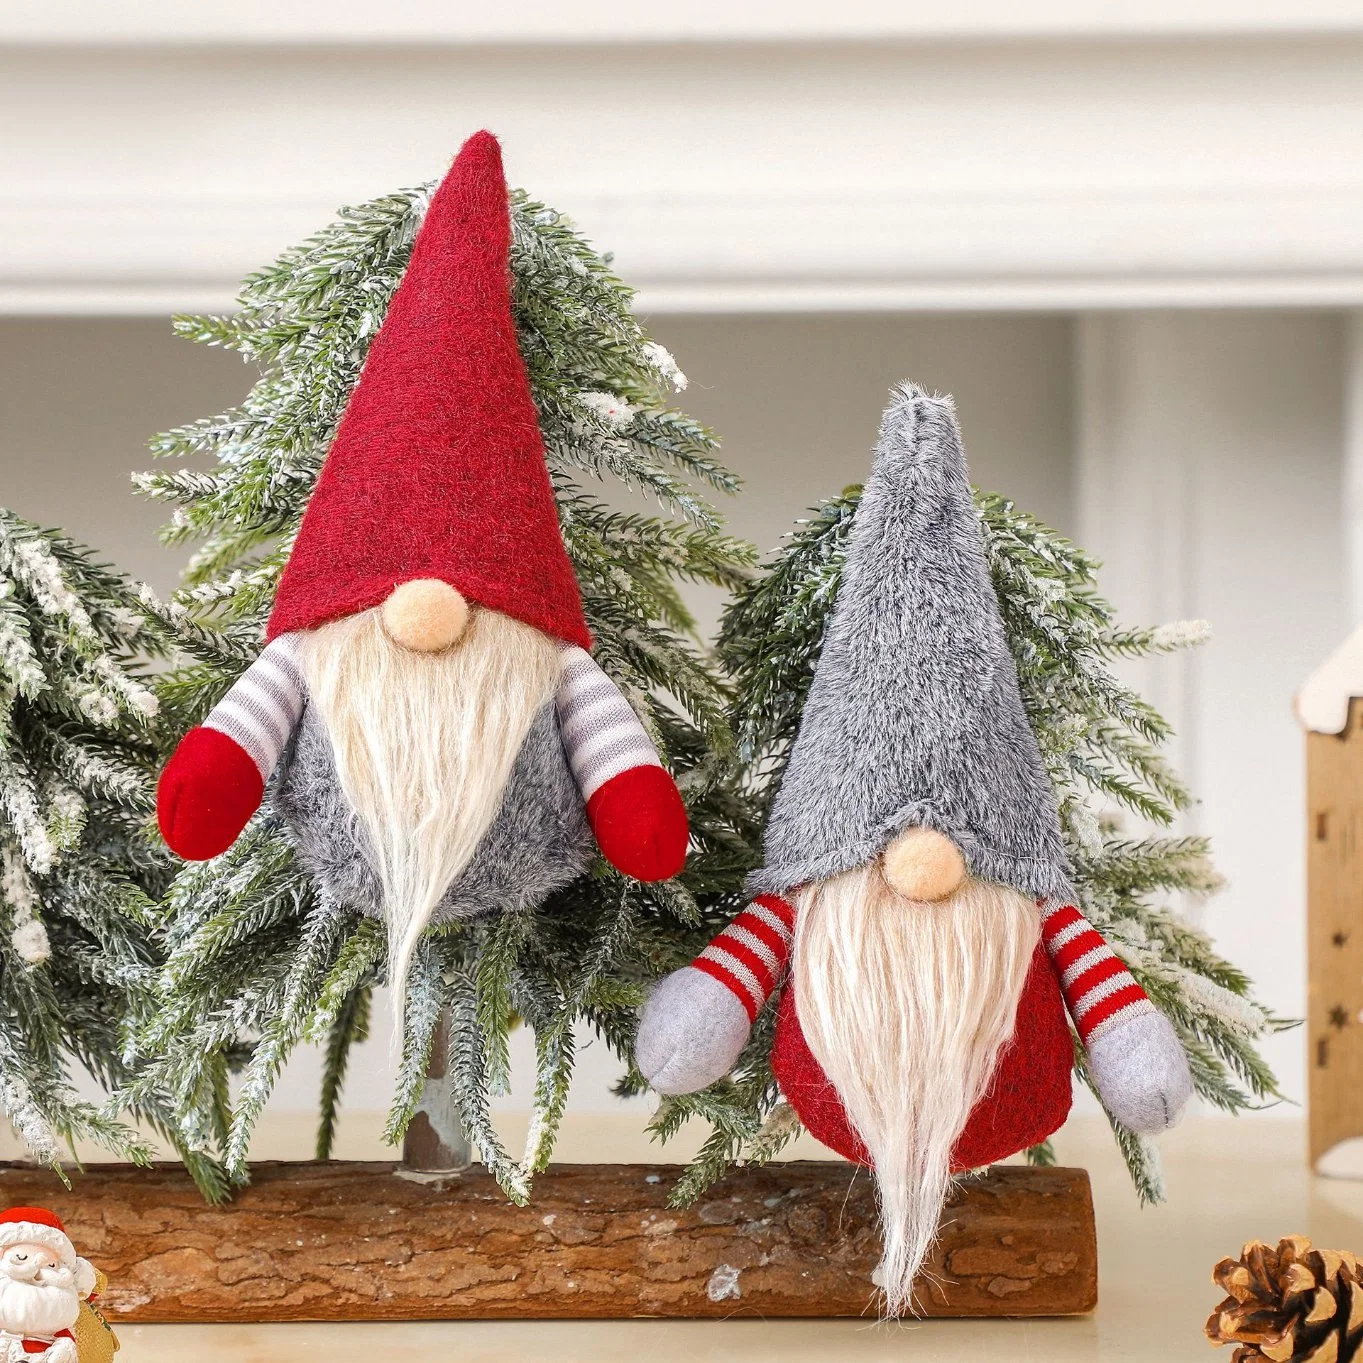 Merry Christmas Decor Product Xmas Noel Santa Claus Red Gonk Plush Gnomes Gifts with Tree Party Supplies